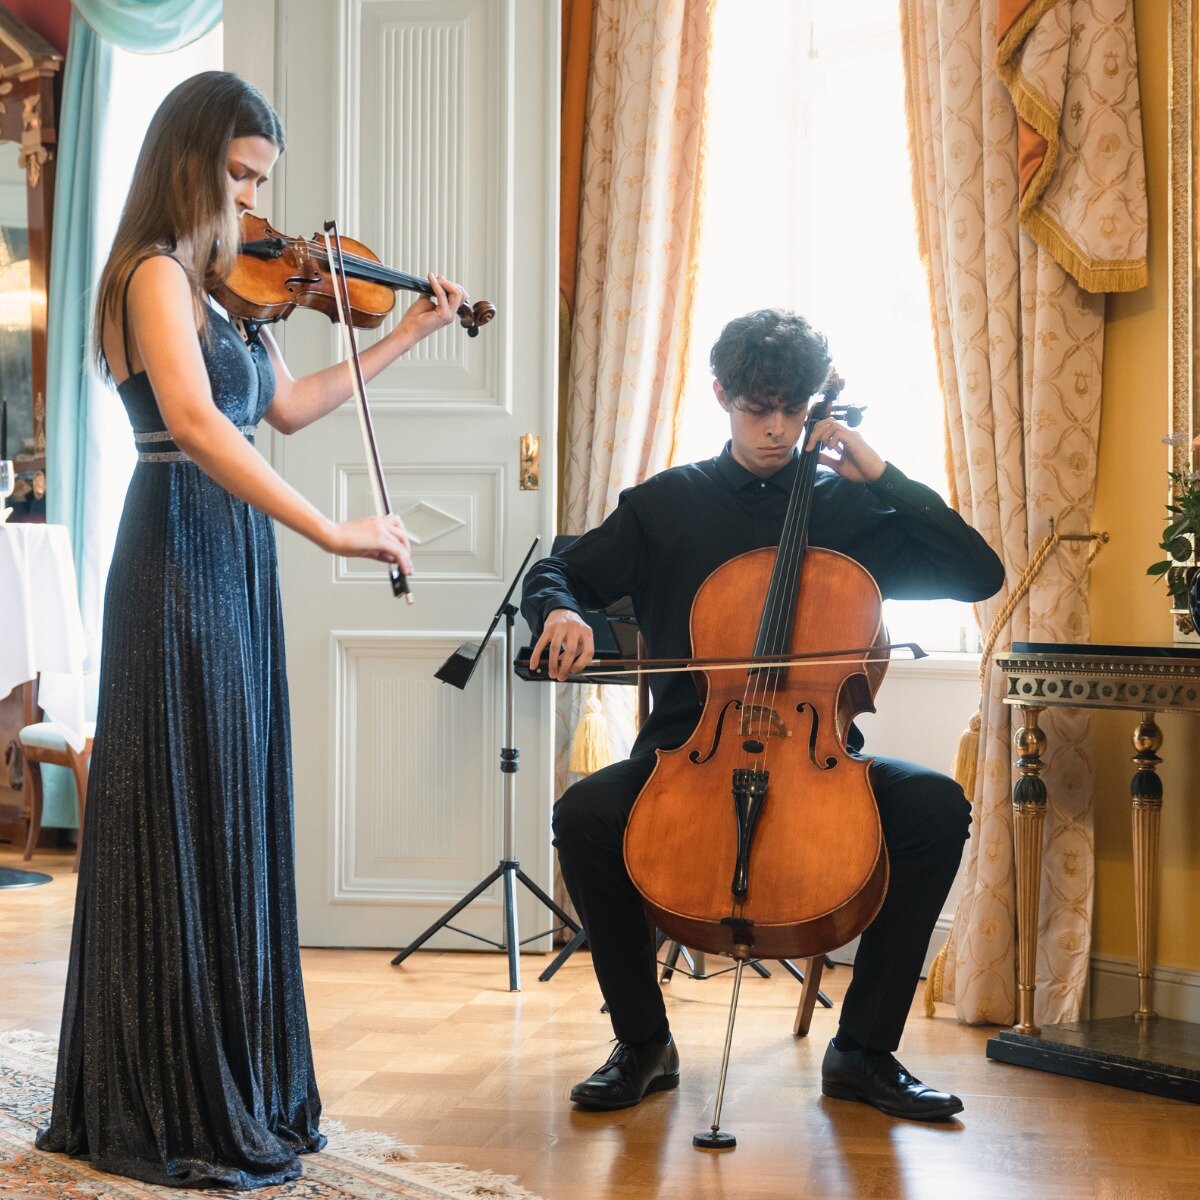 The first concert in the Manor House is SOLD OUT! 

Tickets are still available for our Fiskars Easter Sessions matinee concert in Lukaali on 28th March with music by Fagerlund, Clyne and Dvorak, and for the final concert on Friday 29th March, featur